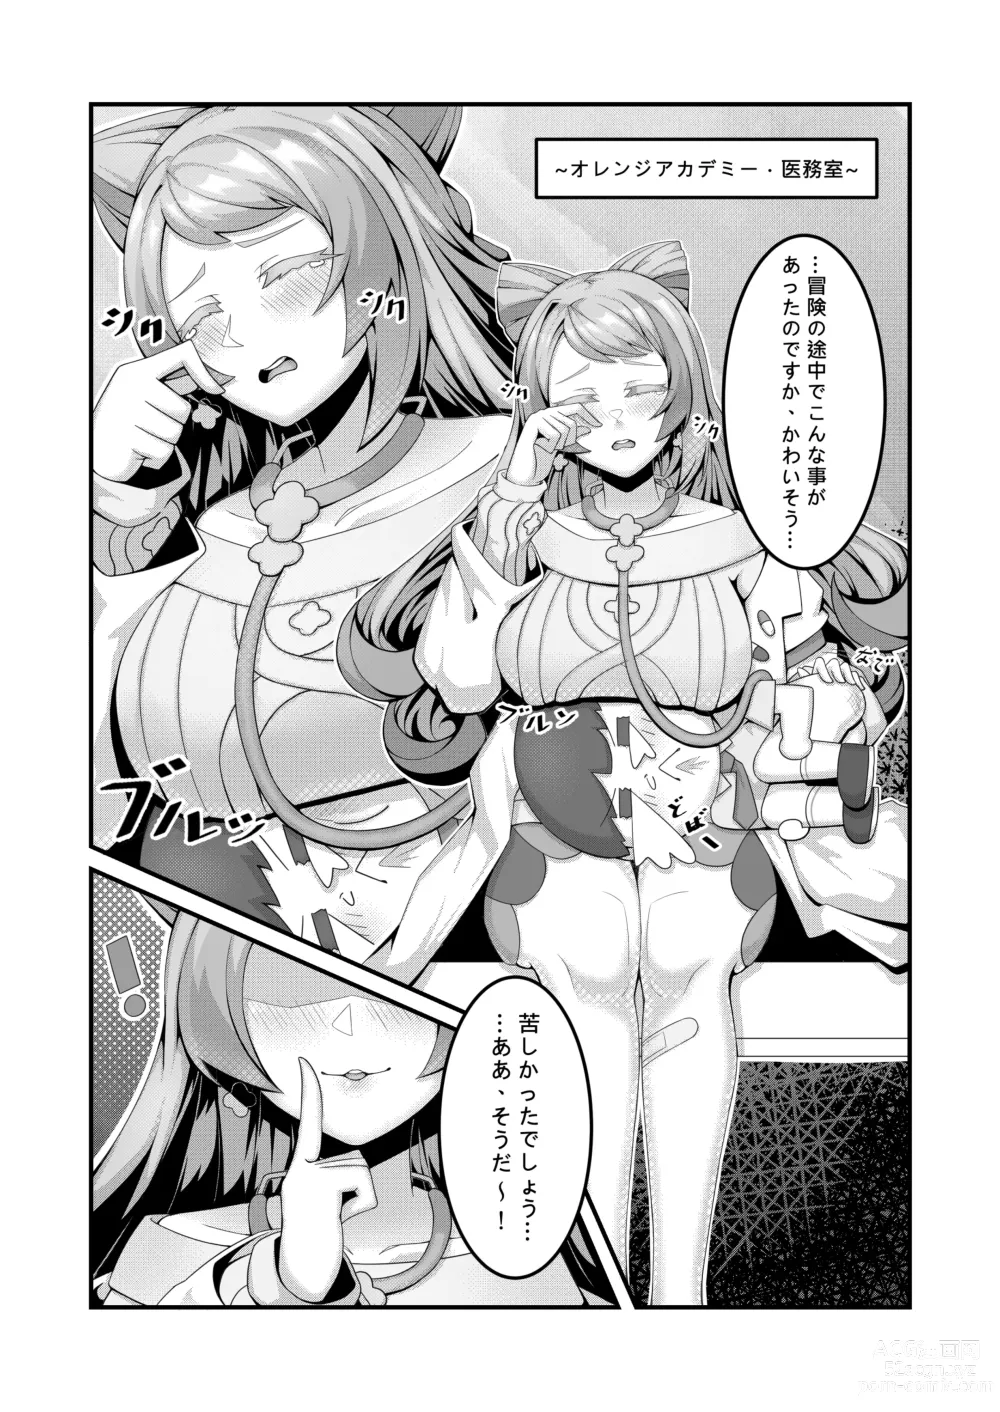 Page 5 of doujinshi Sex after Versus？ - ミモザ & キハダ